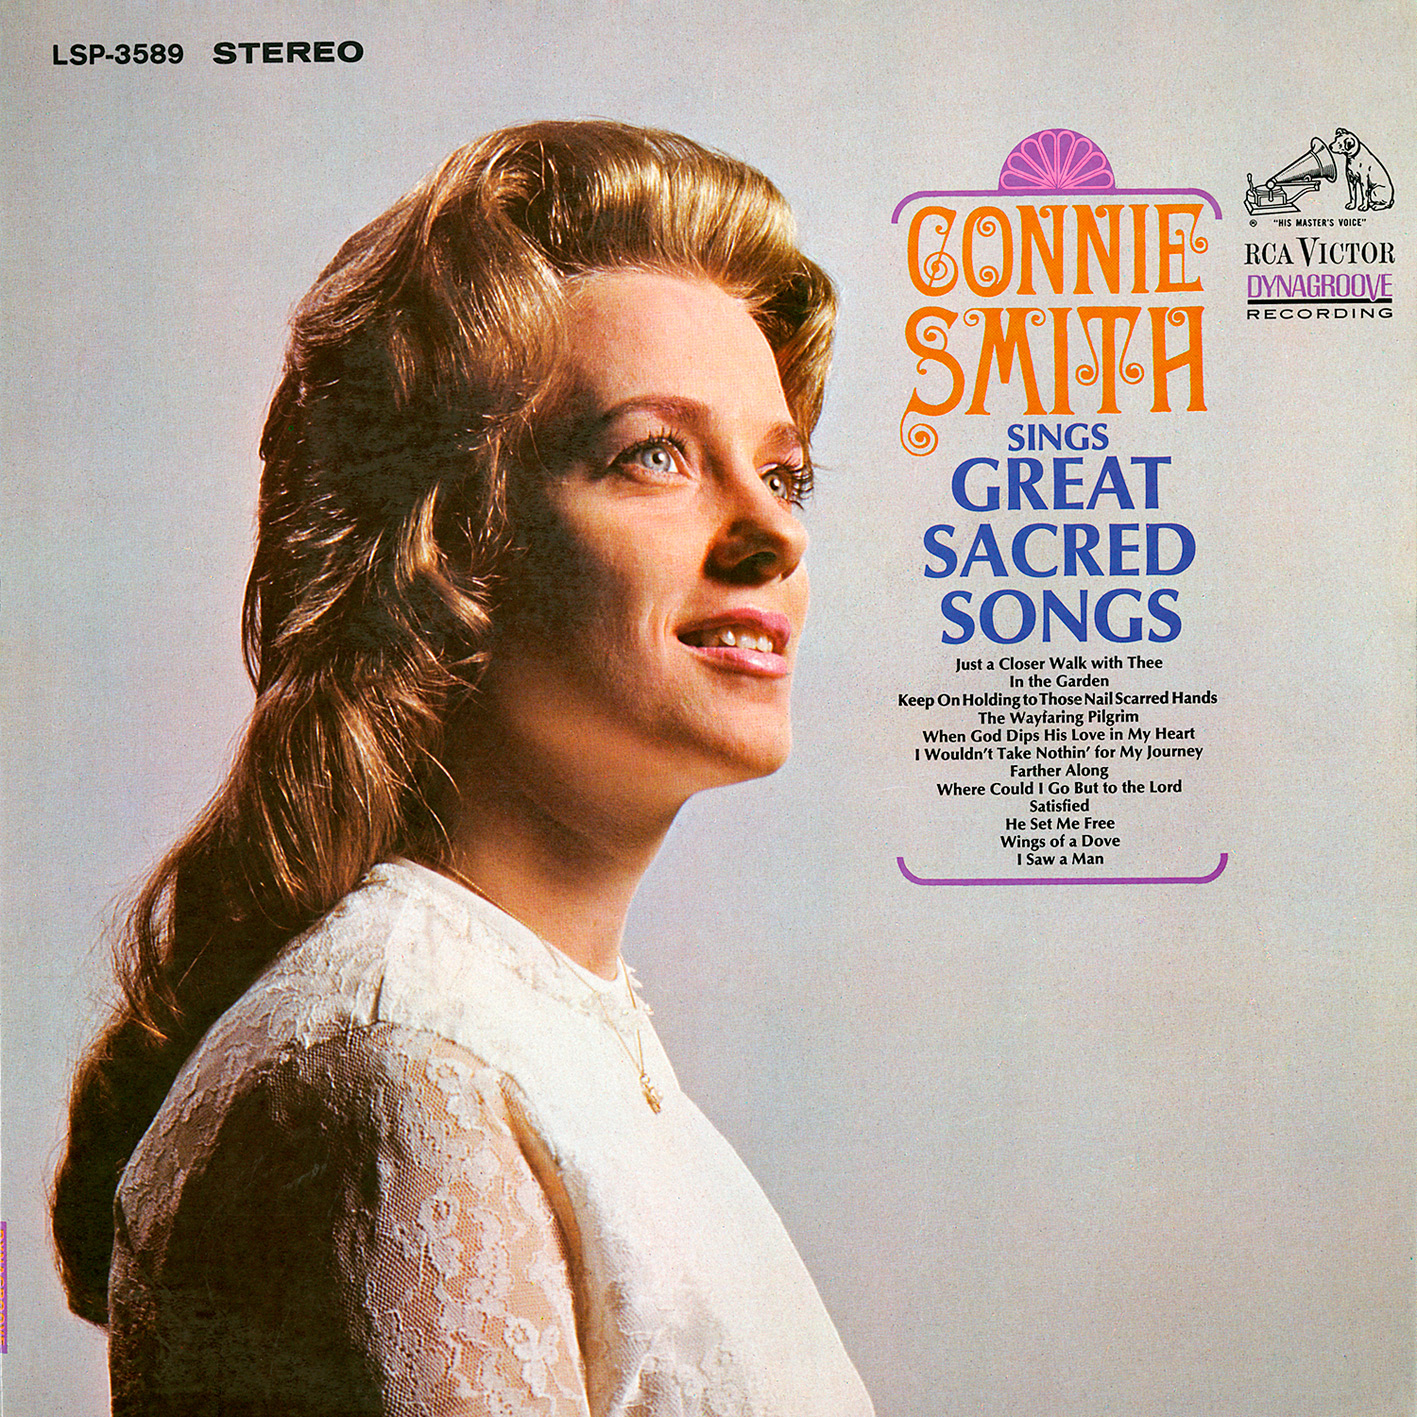 Connie Smith - Sings Great Sacred Songs (1966/2016) [AcousticSounds FLAC 24bit/192kHz]